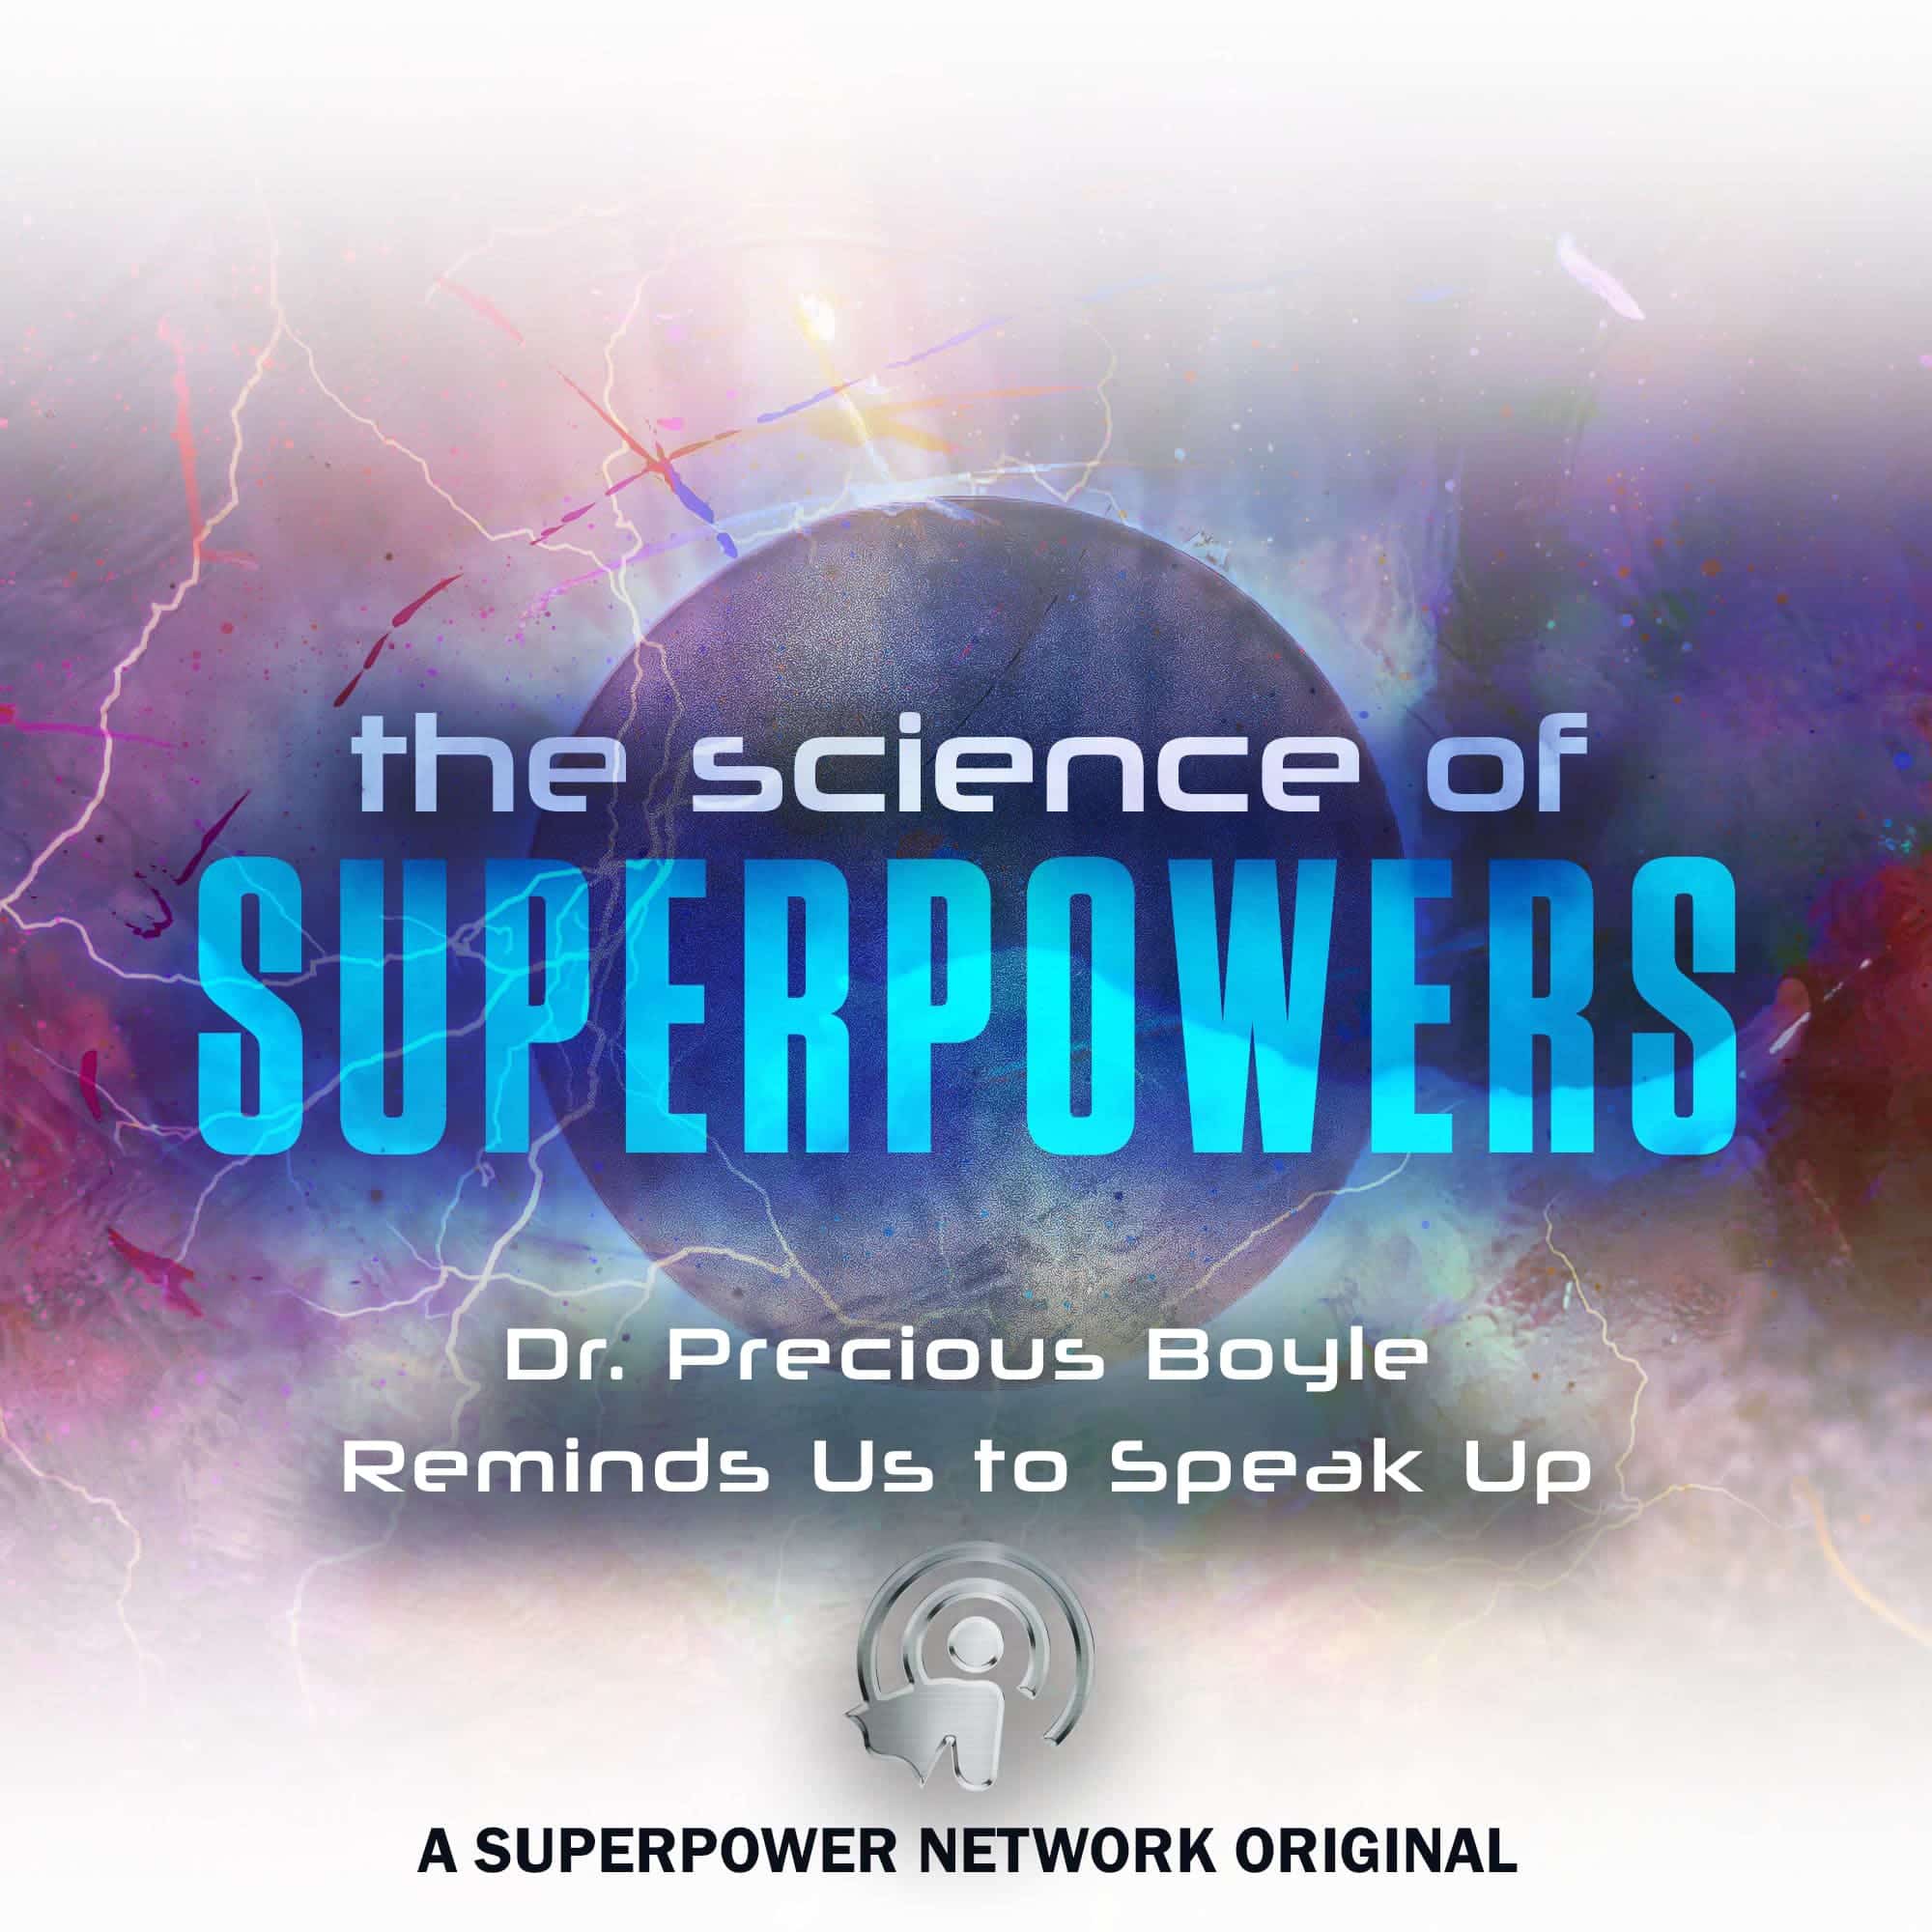 The Science of Superpowers, SOS. Dr. Precious Boyle Reminds Us to Speak Up, Master Your Personal Power #SOS #SpeakUp #MasterYourPersonalPower #superpowers #Superpowerexperts #SuperPowerNetwork